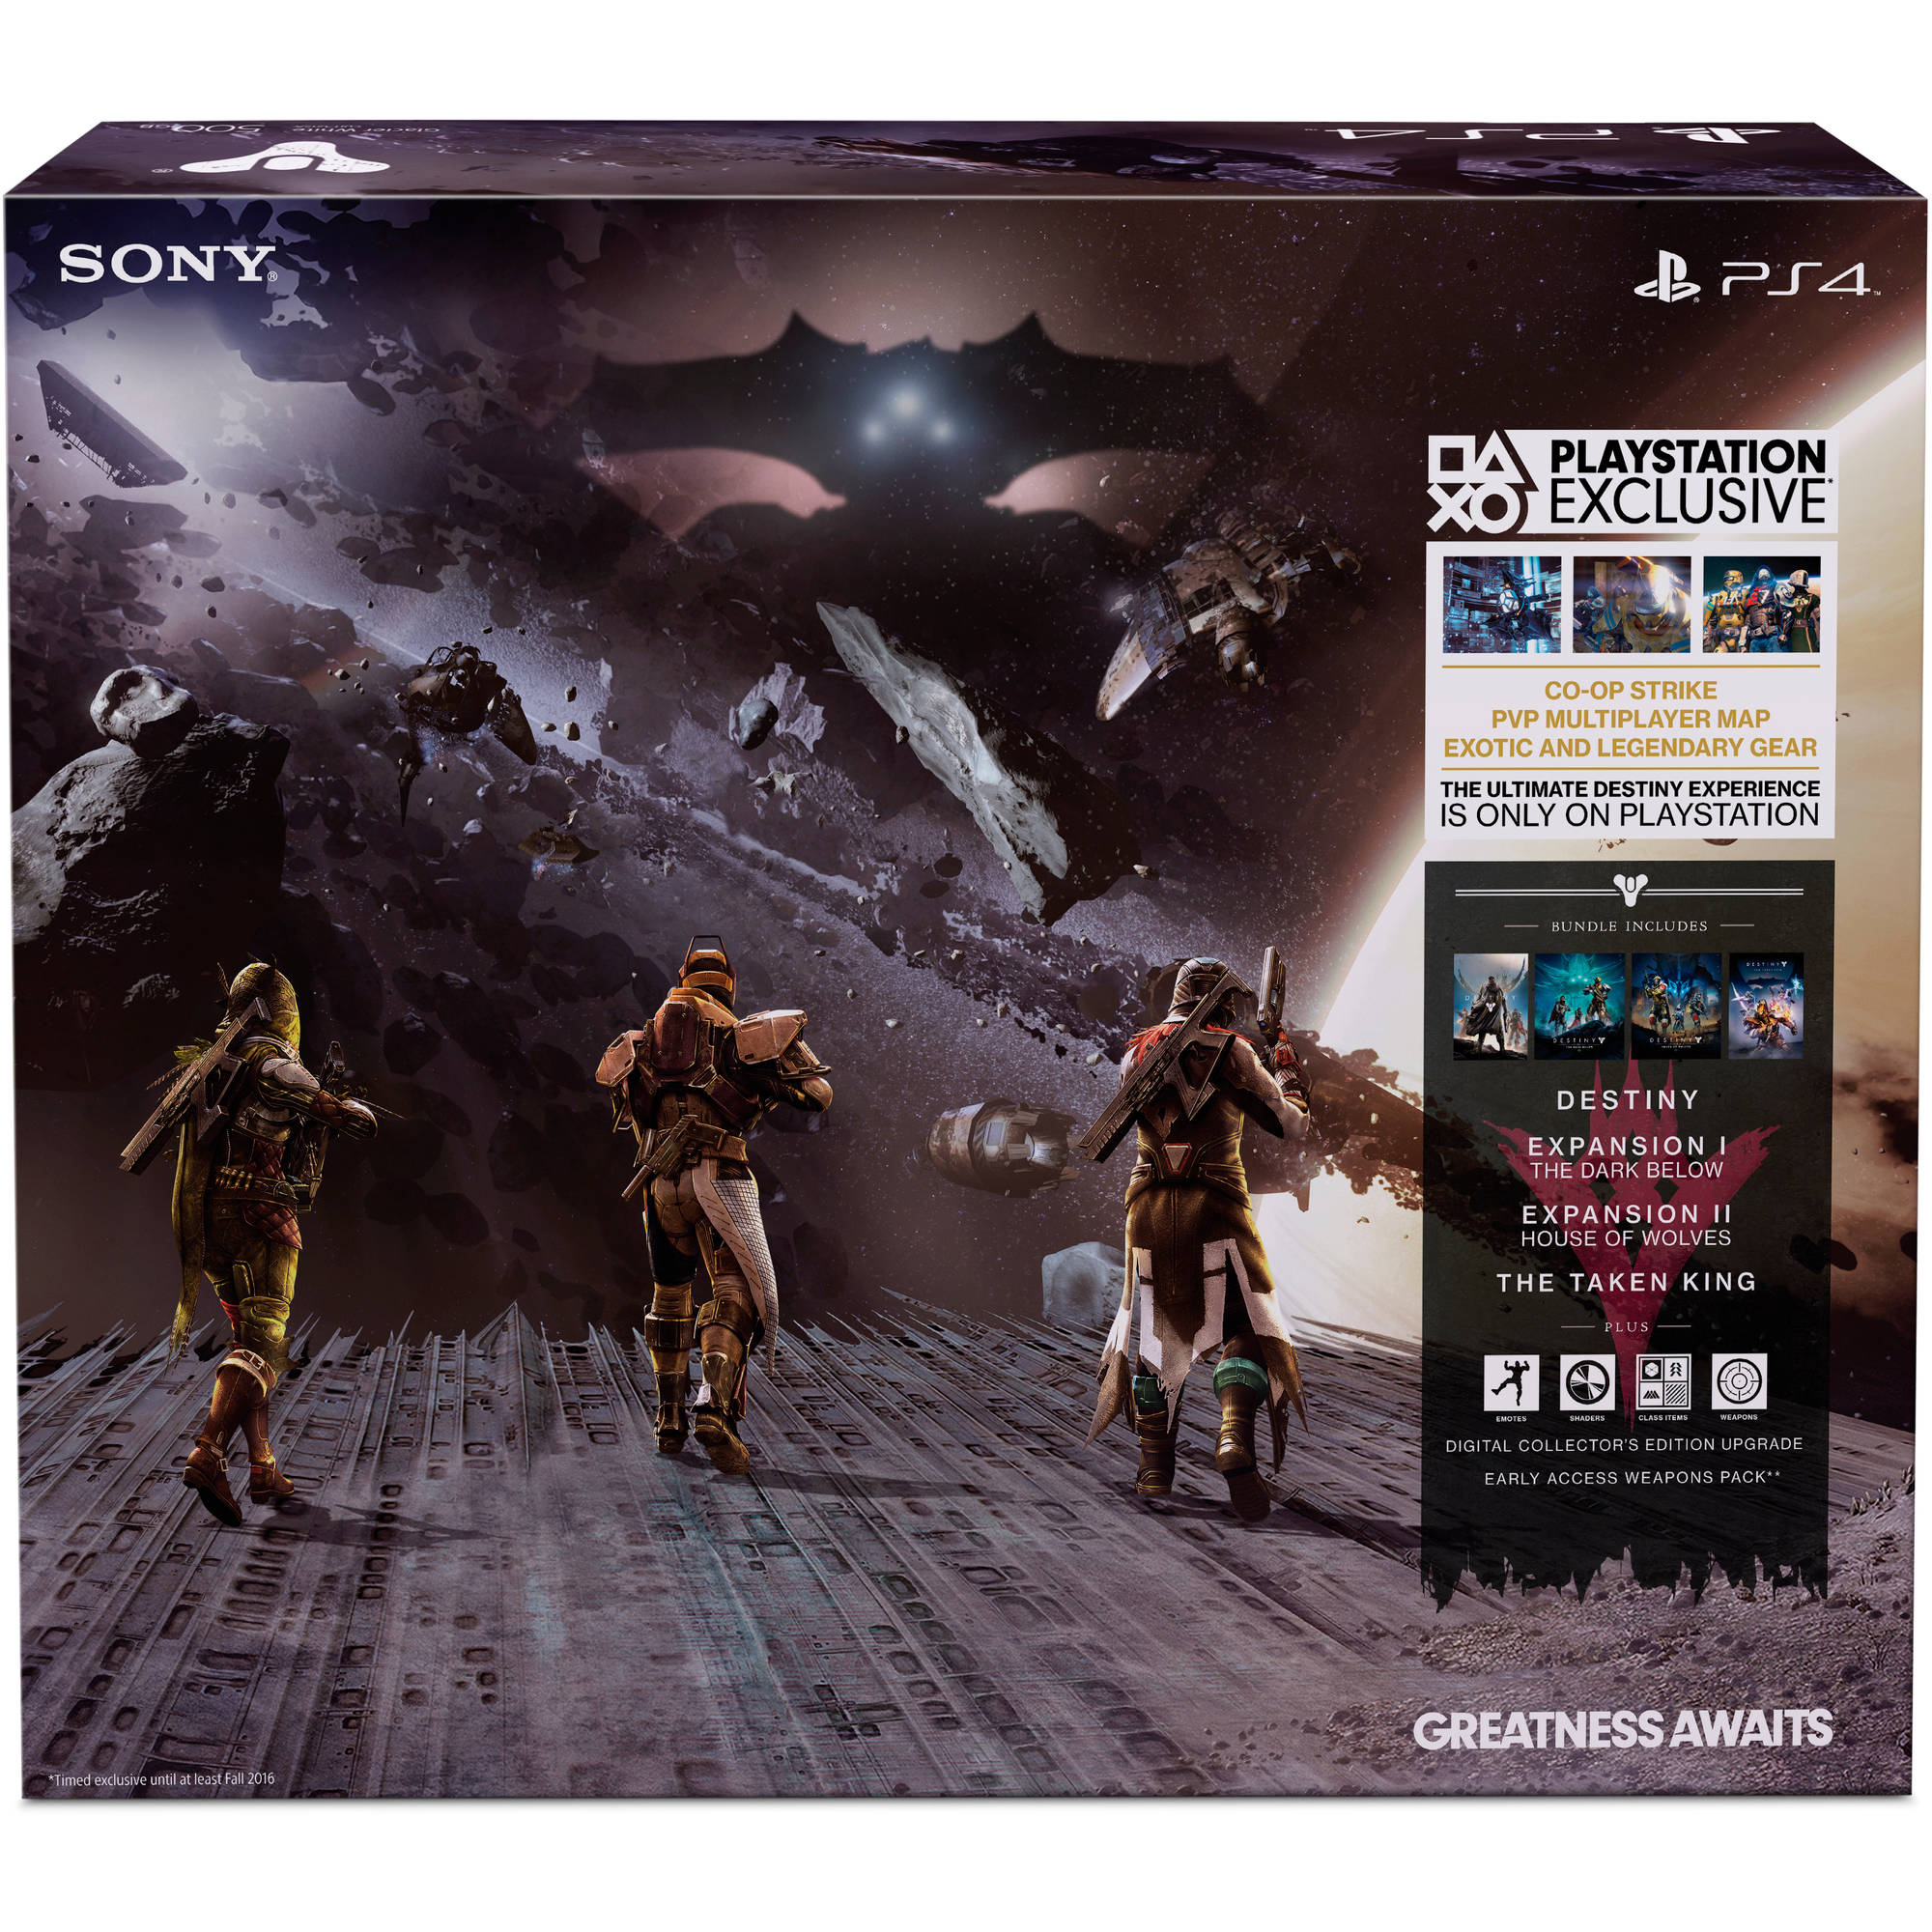 PlayStation 4 500GB Limited Edition Console - Destiny: The Taken King Bundle [Discontinued] (Used/Pre-Owned) - image 5 of 10